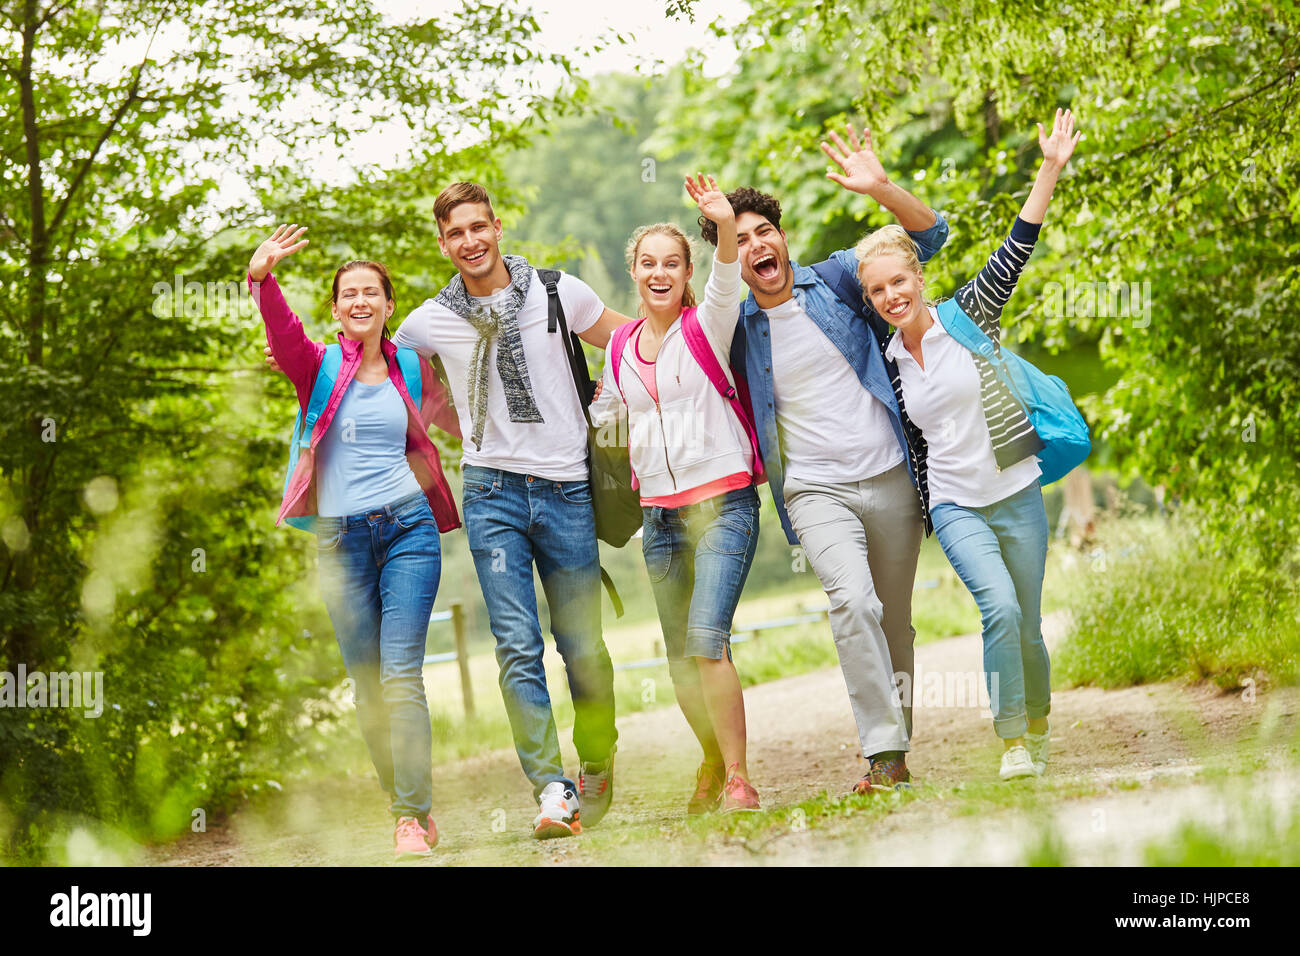 Group of hiking friends having fun and laughing Stock Photo